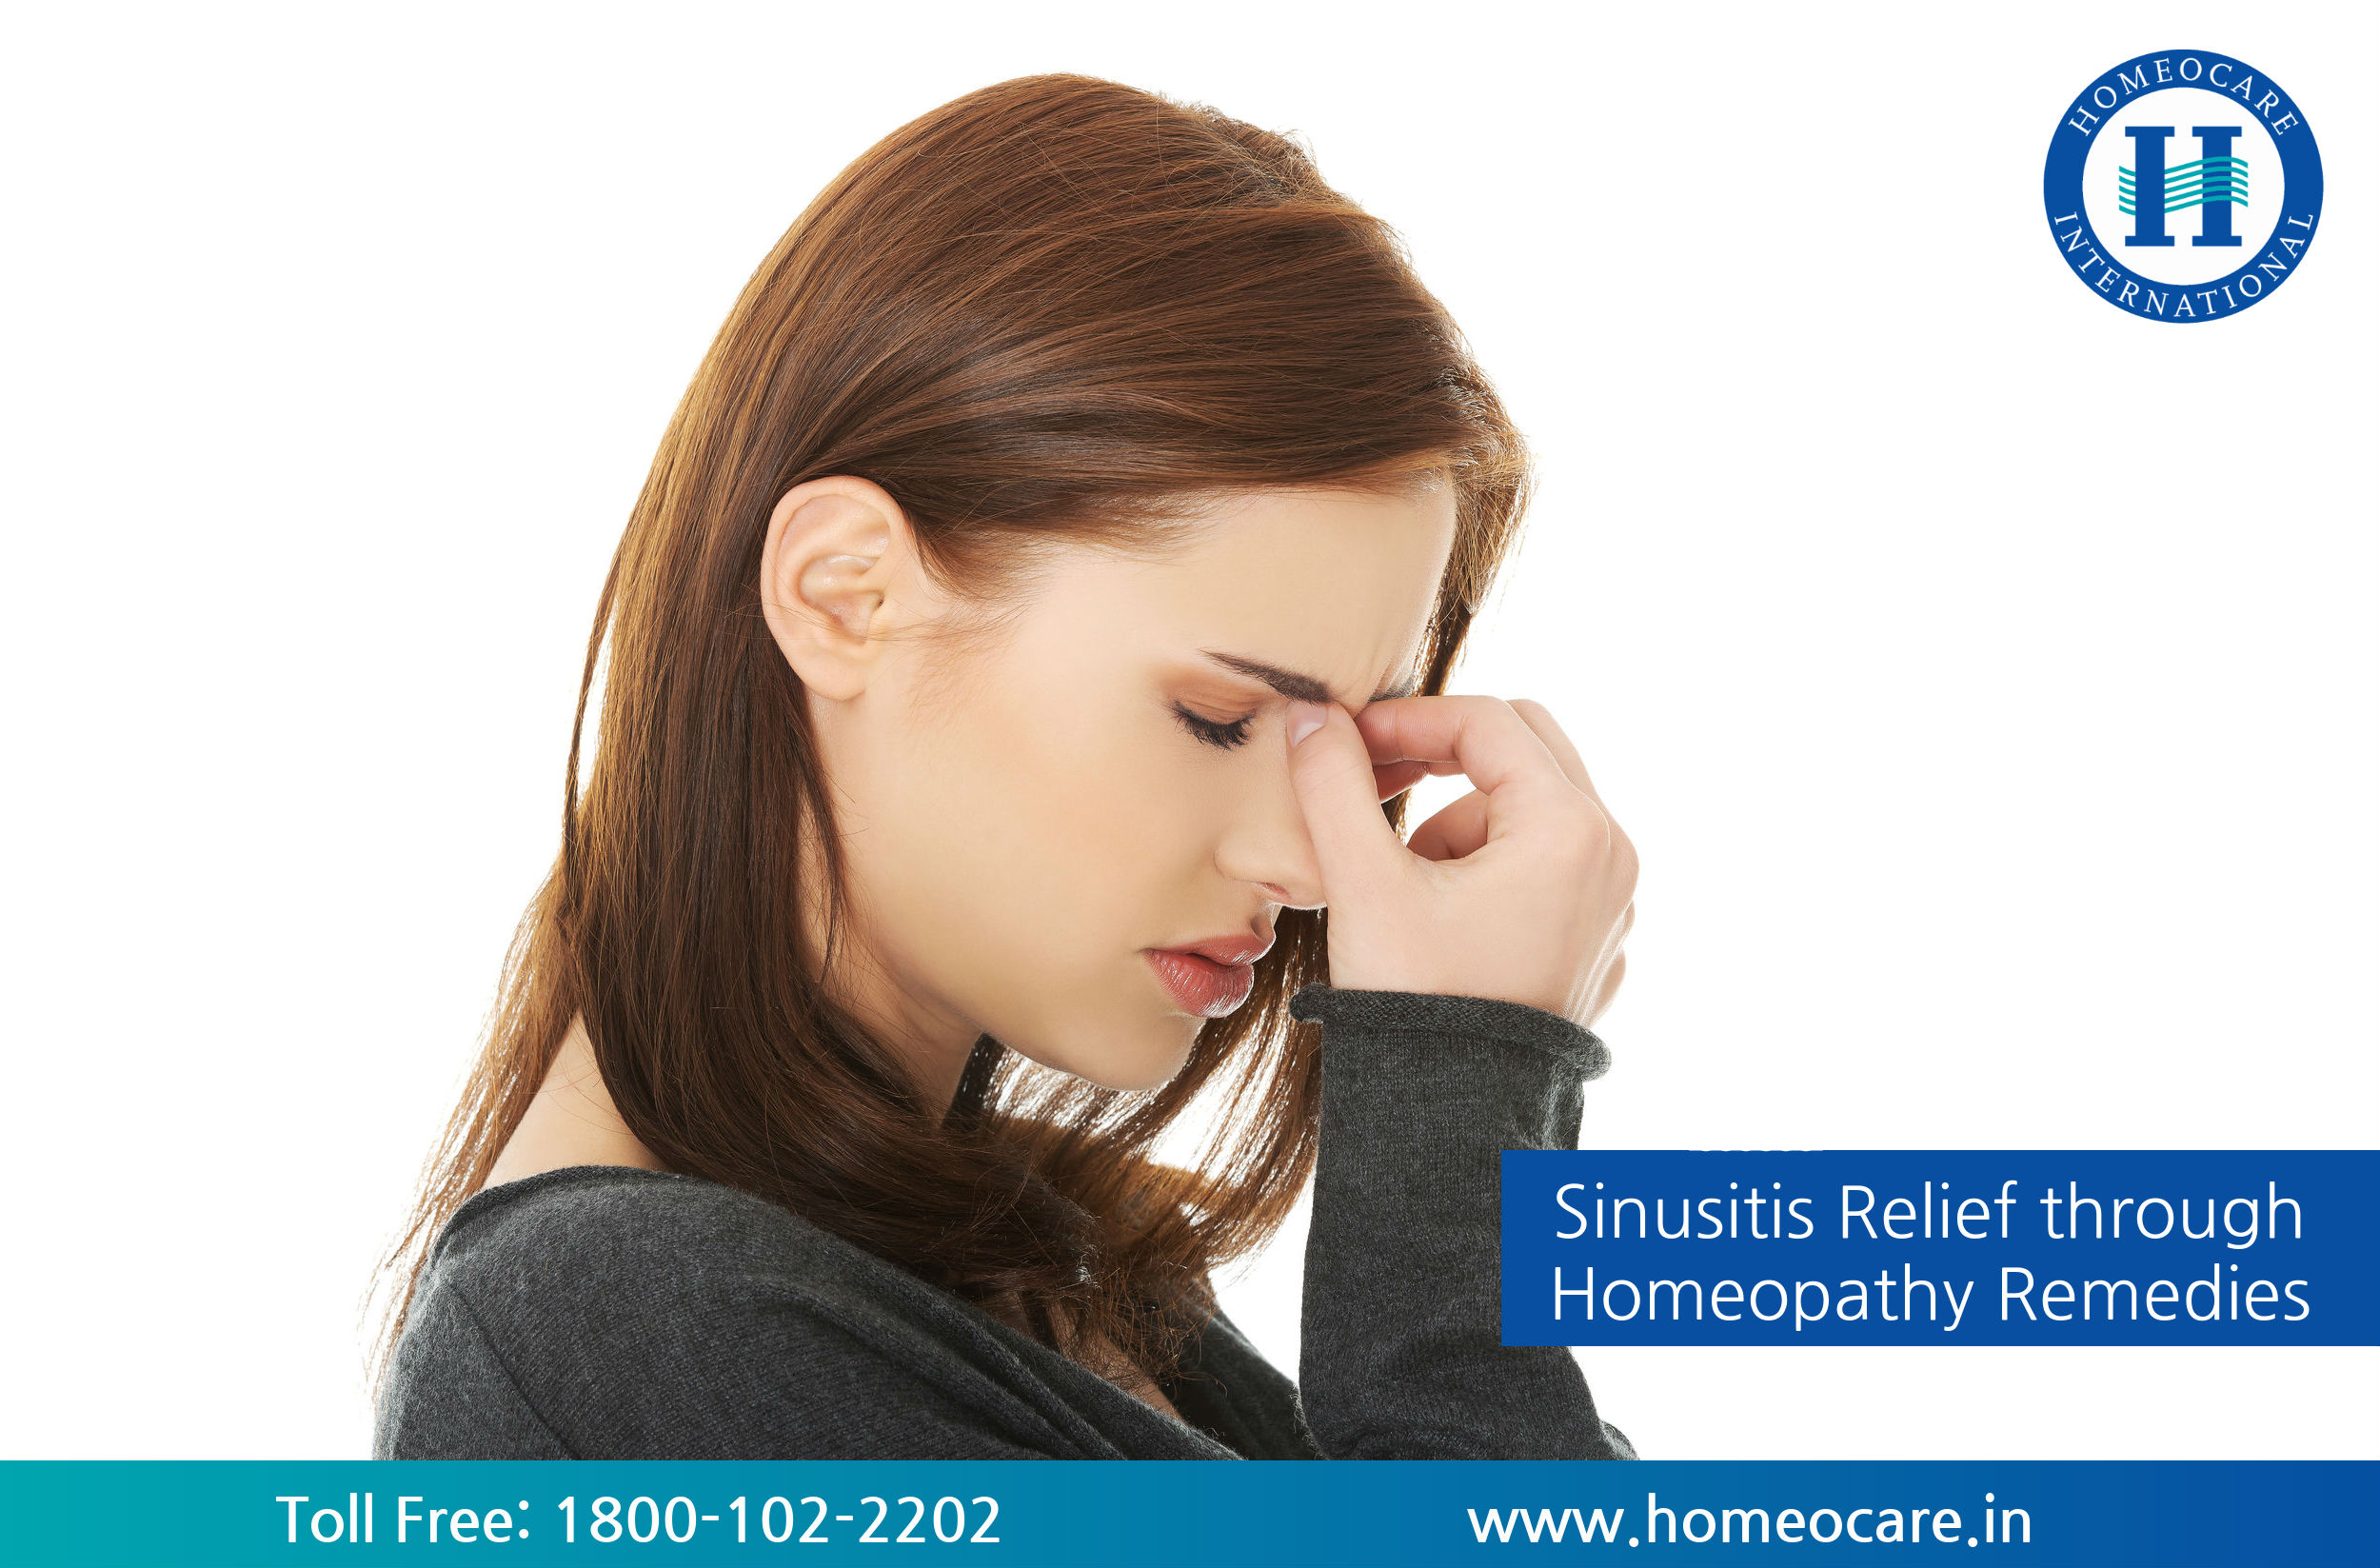 Why Homeopathy for Sinusitis?